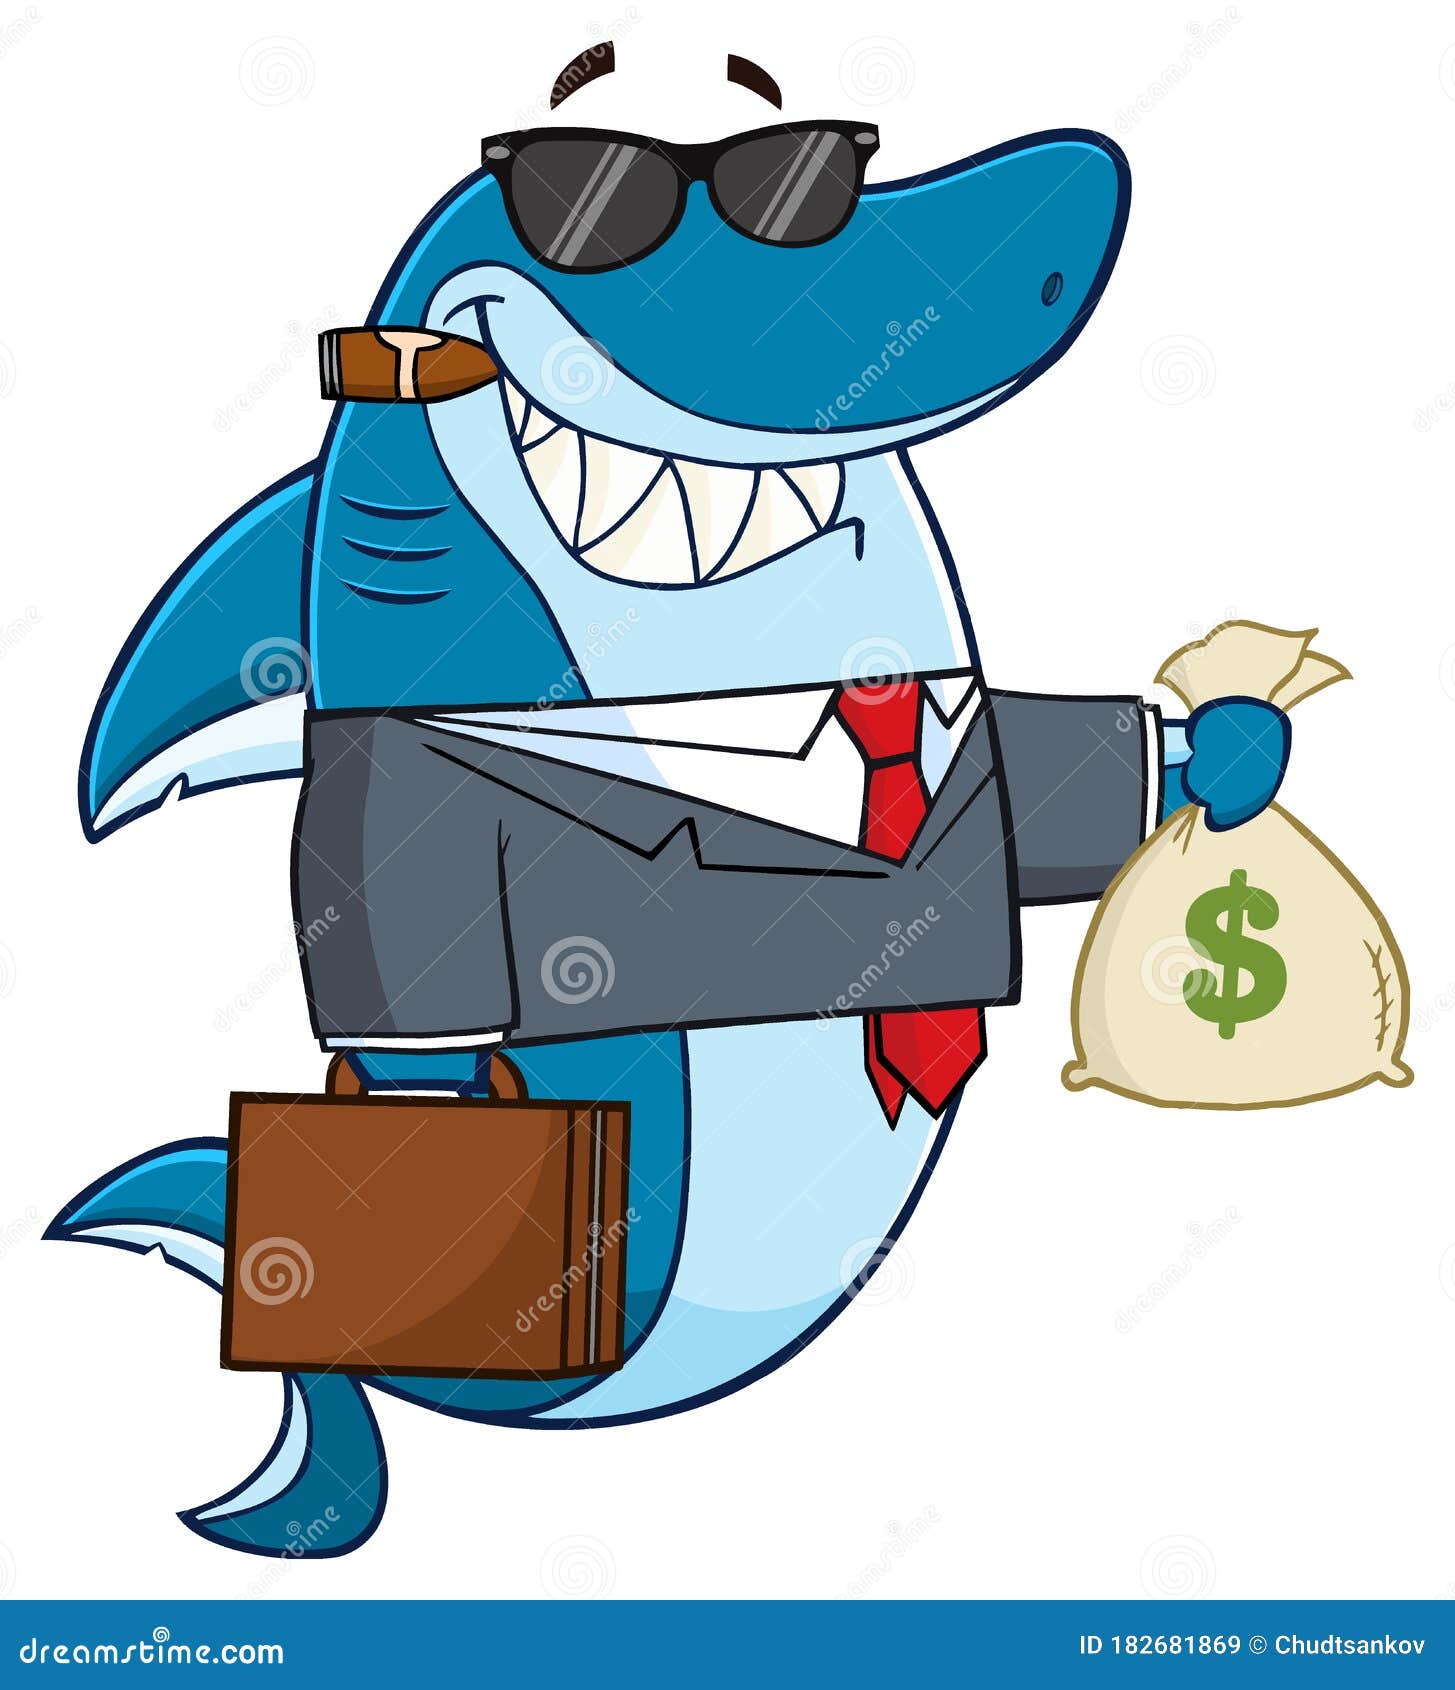 smiling-business-shark-cartoon-mascot-character-suit-carrying-briefcase-holding-money-bag-smiling-business-shark-182681869.jpg